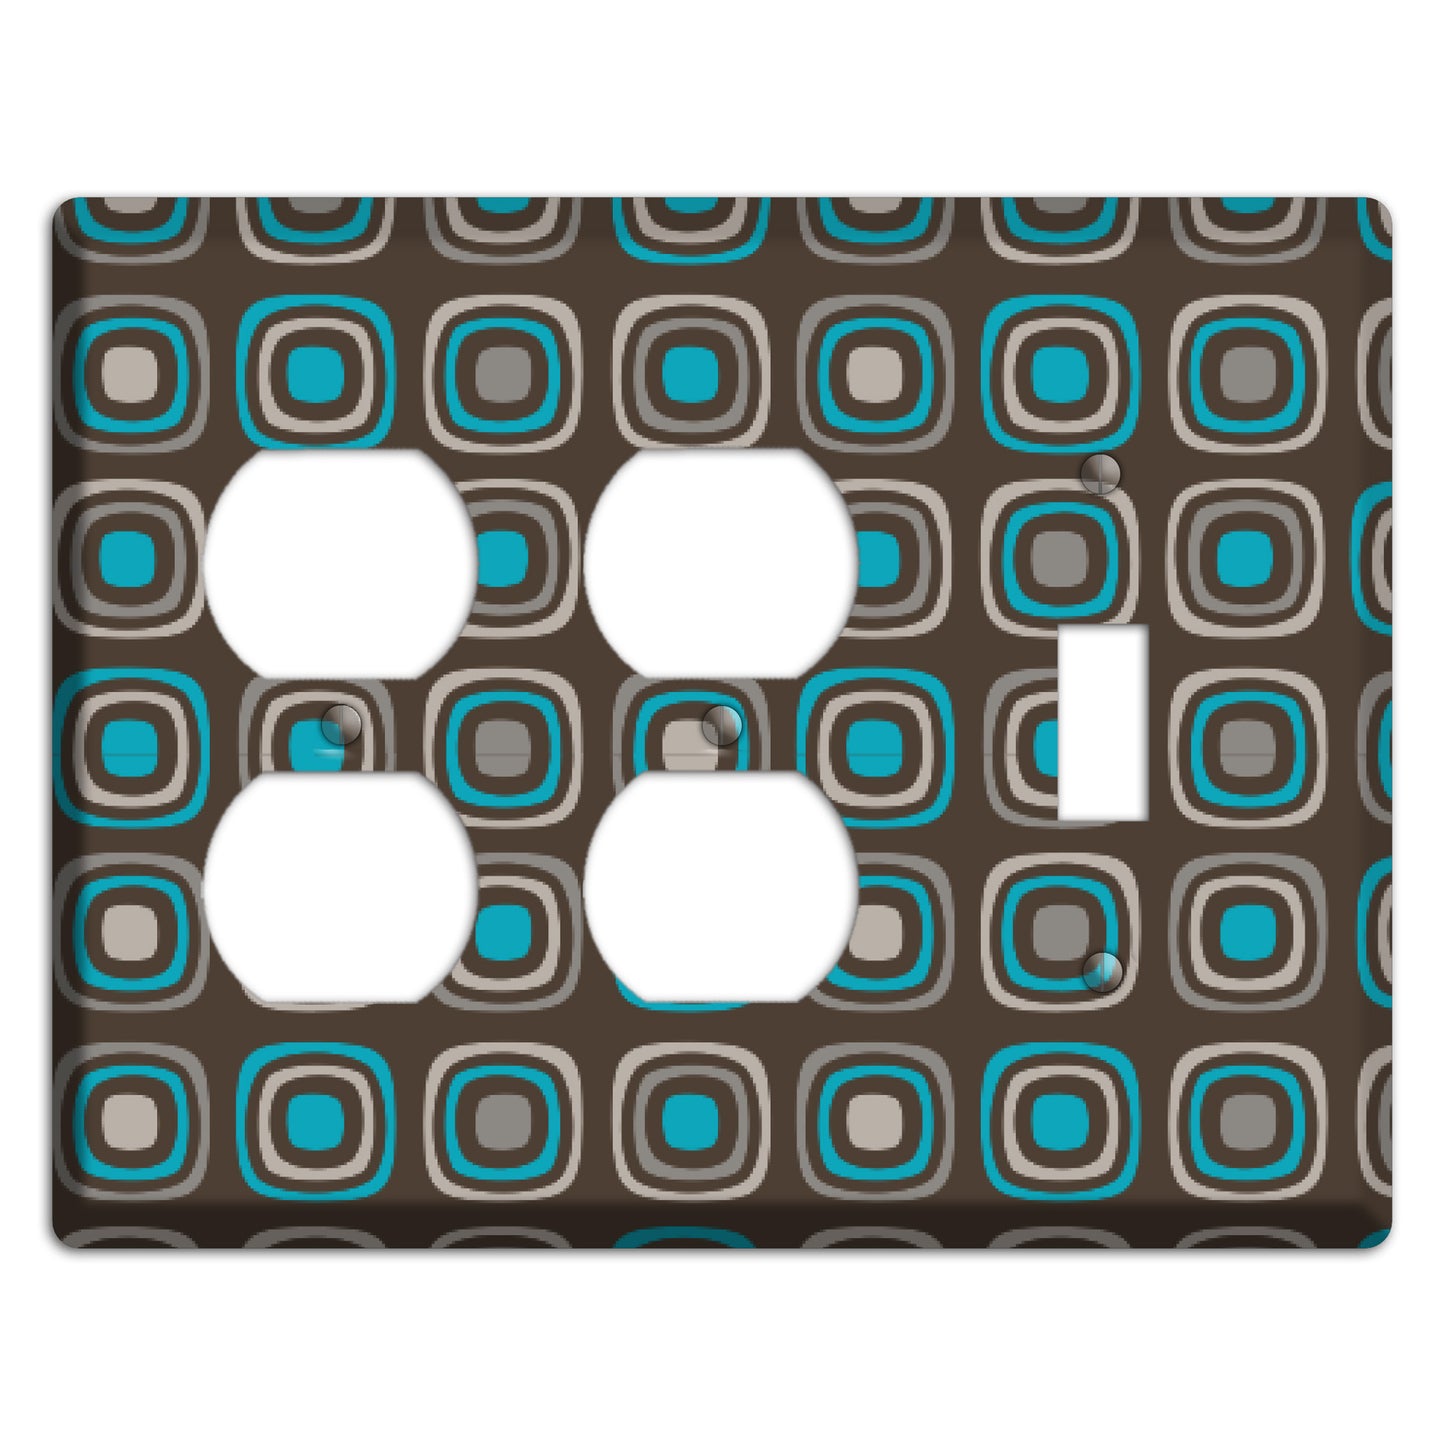 Multi Brown and Turquoise Retro Squares 2 Duplex / Toggle Wallplate